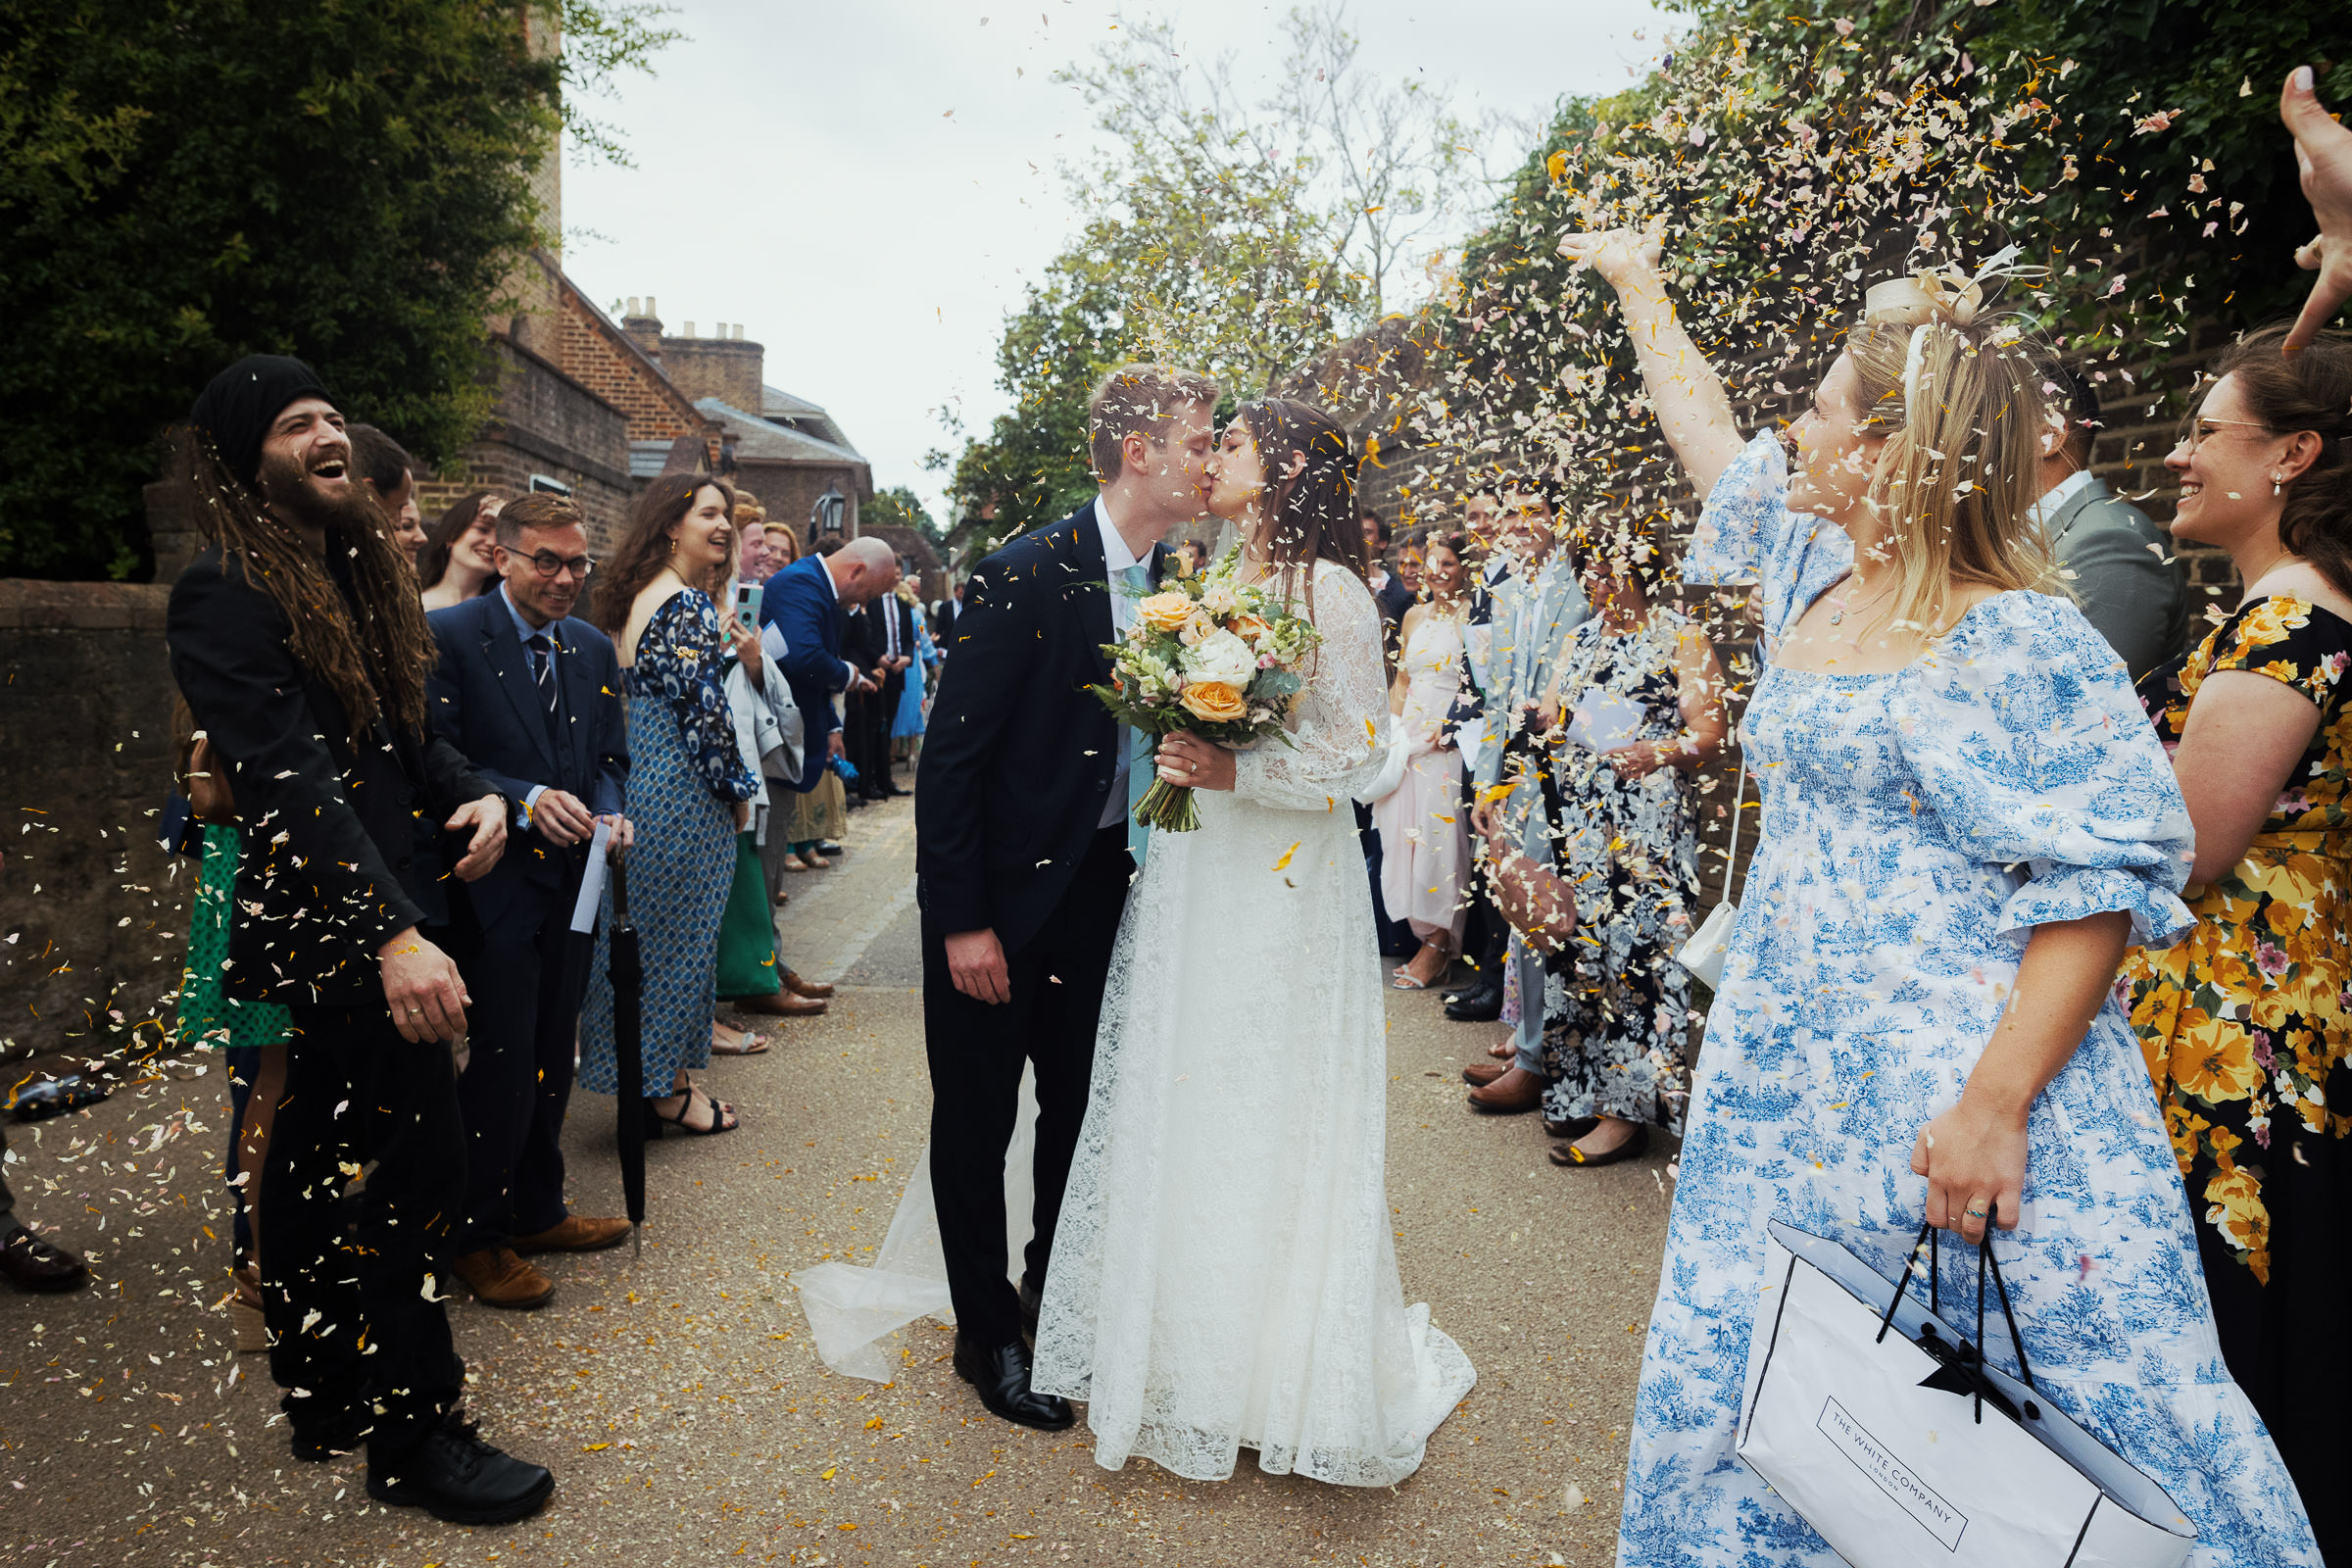 A woman with blonde hair wearing a Nothing Fits But Kiko Dress is throwing confetti over the kissing newly married couple. A wedding at St Peter's Church in Petersham. On the left a woman is wearing the Rixo midi dress called Jeanie.